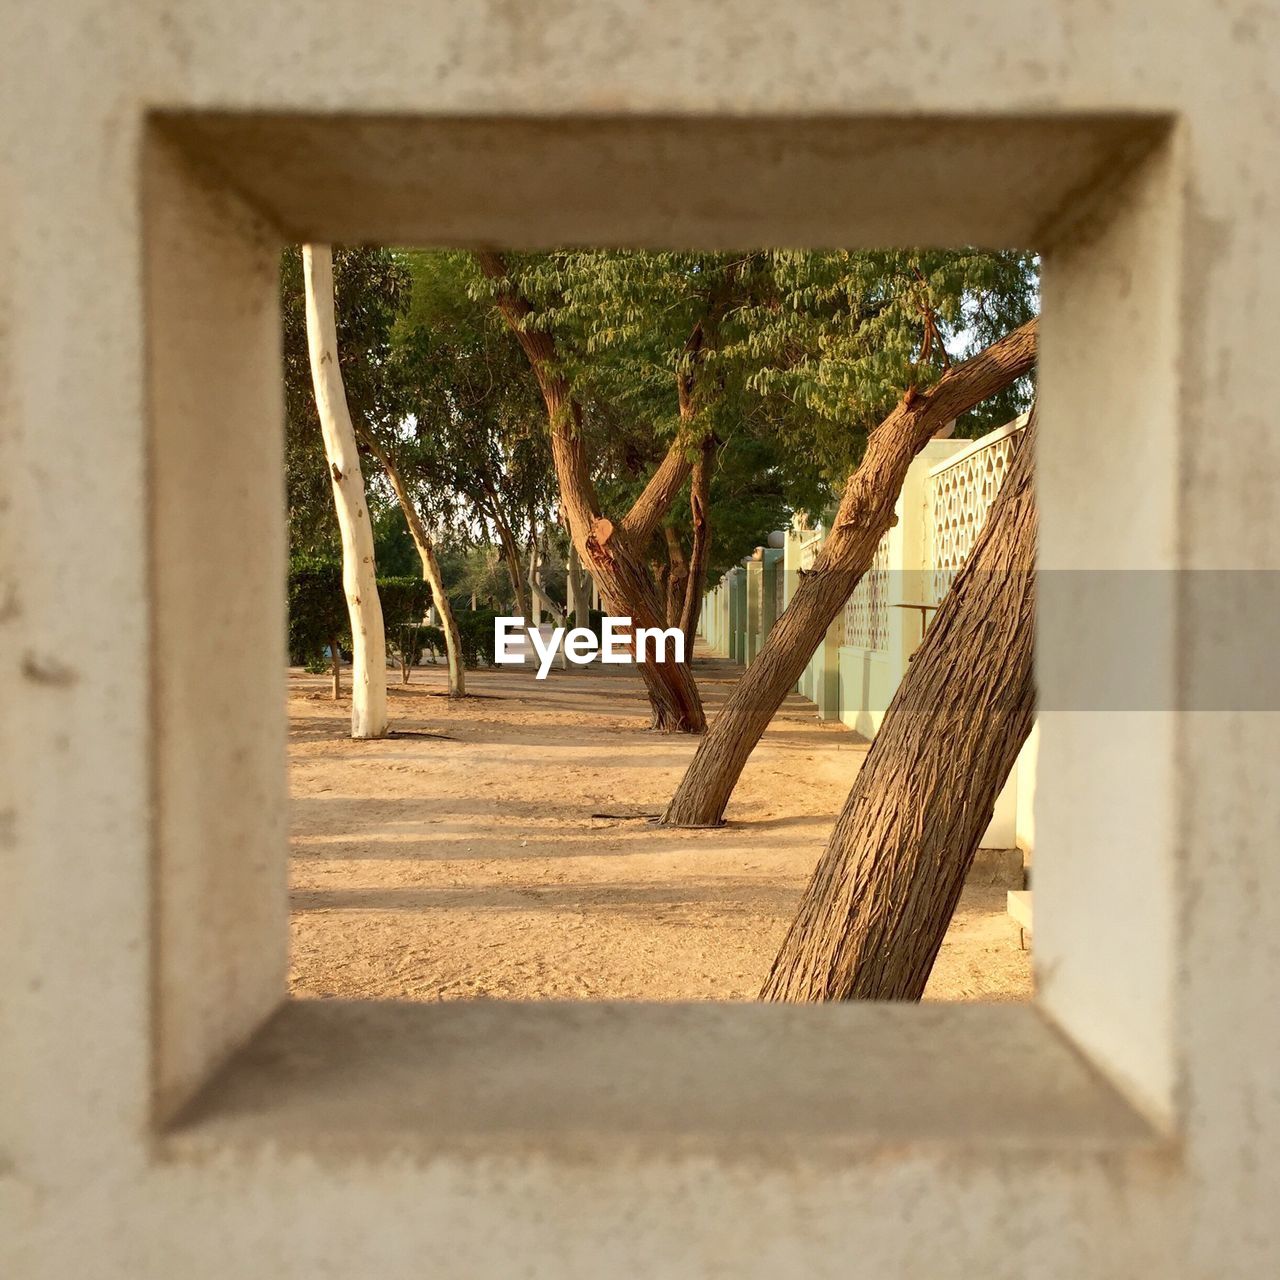 Trees seen through square shaped window